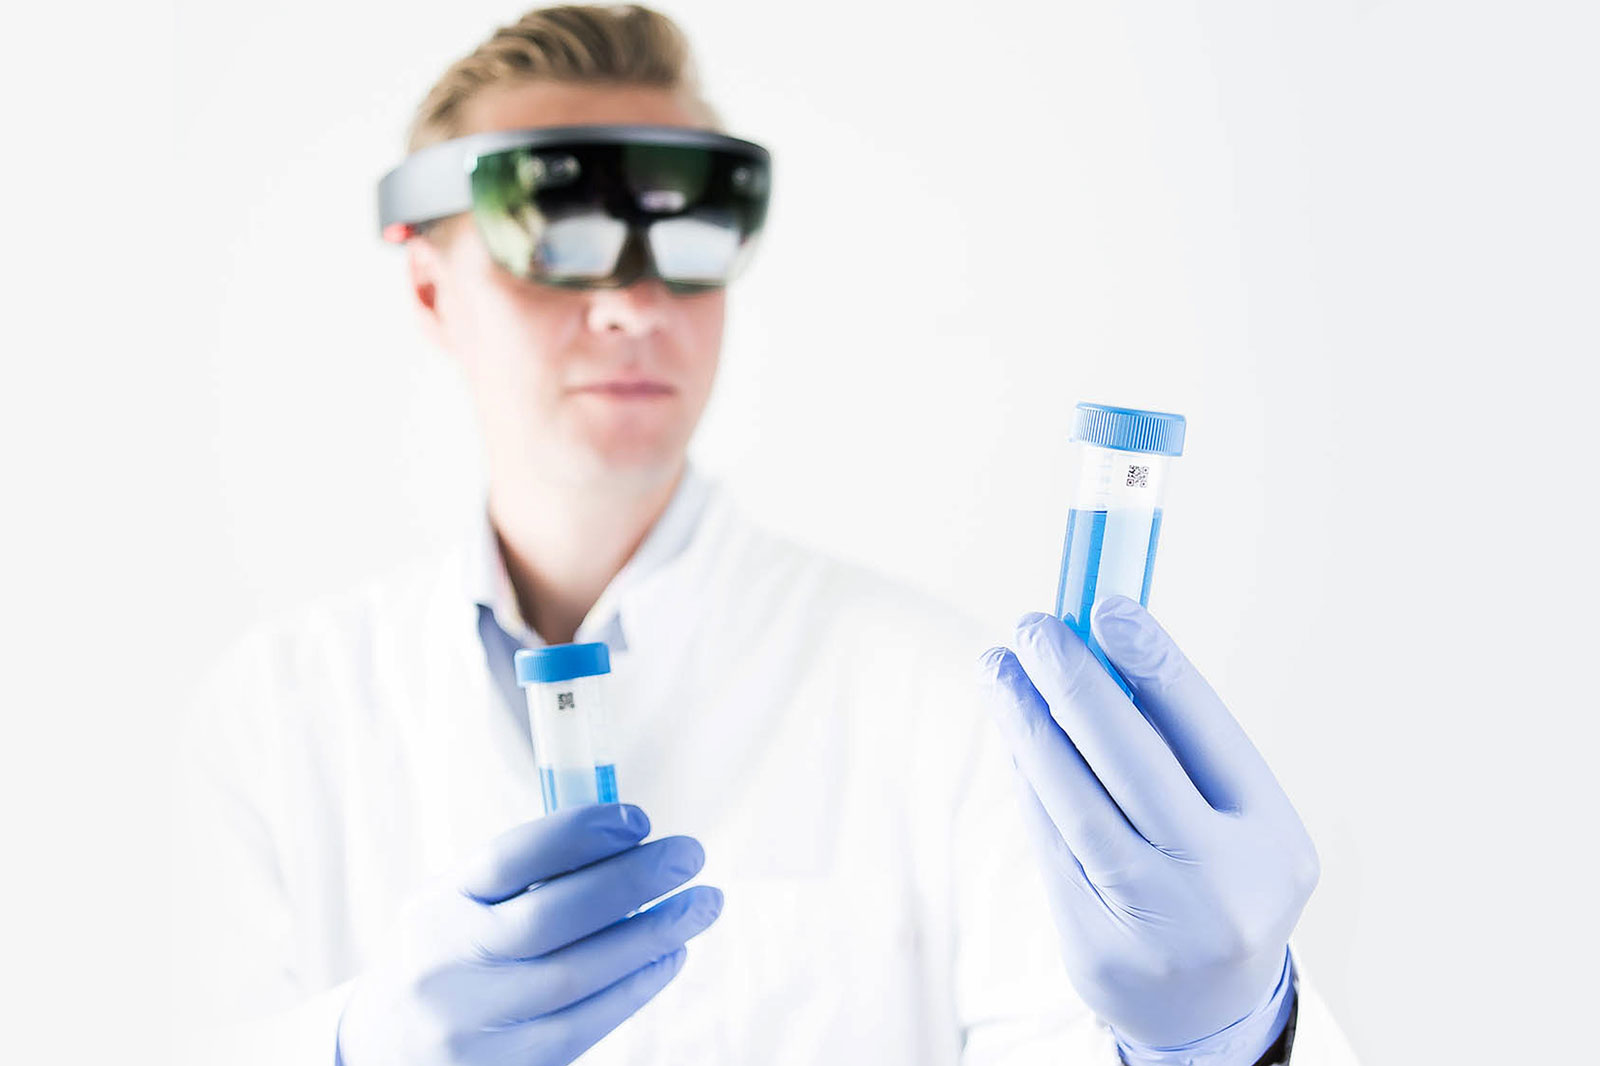 XR Hub team: Sciar. A person in laboratory equipment is looking at a test tube using augmented reality glasses.